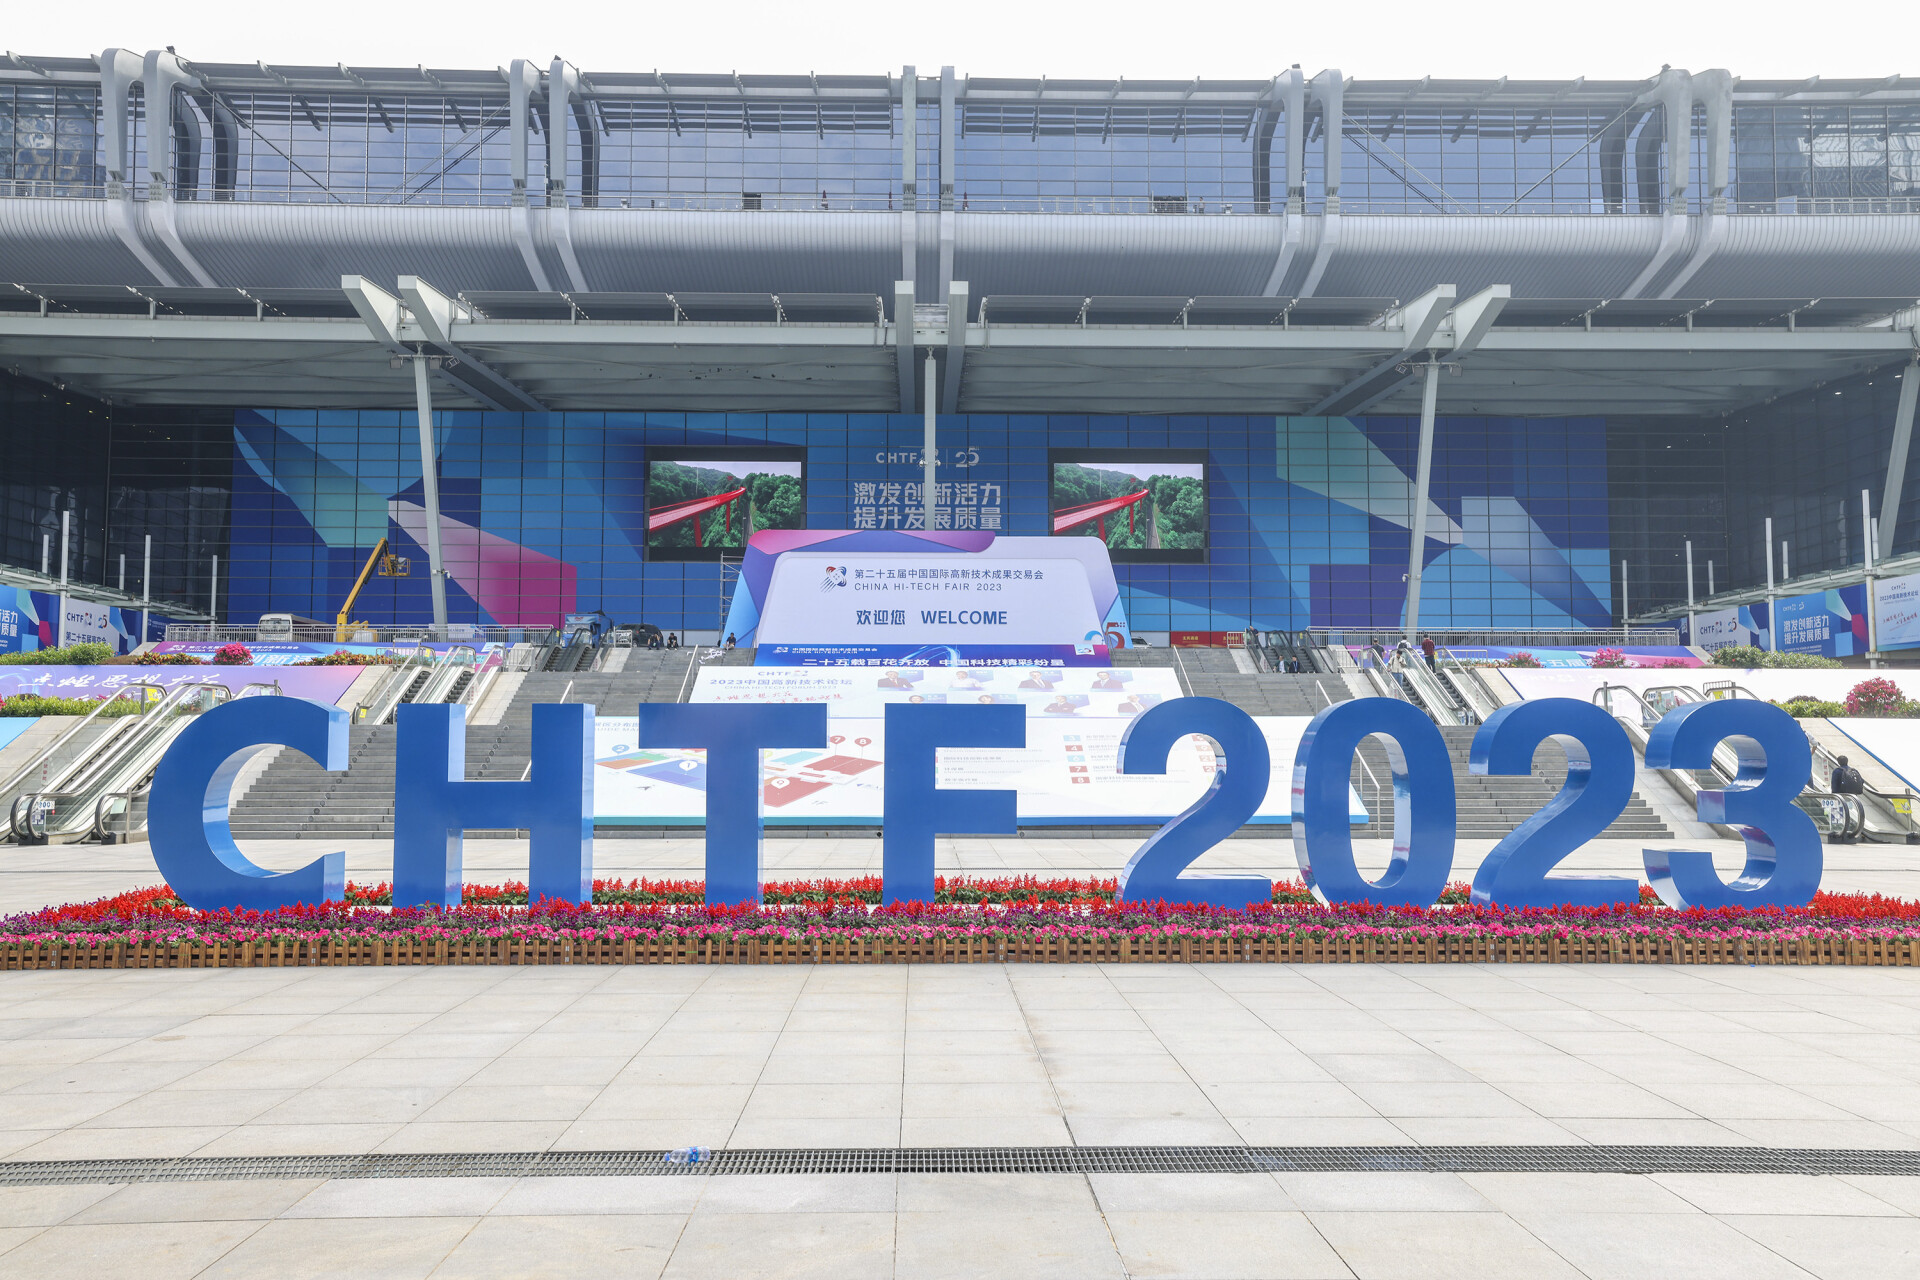 The 25th China Hi-Tech Fair closes with 37.279 billion RMB in negotiated transactions